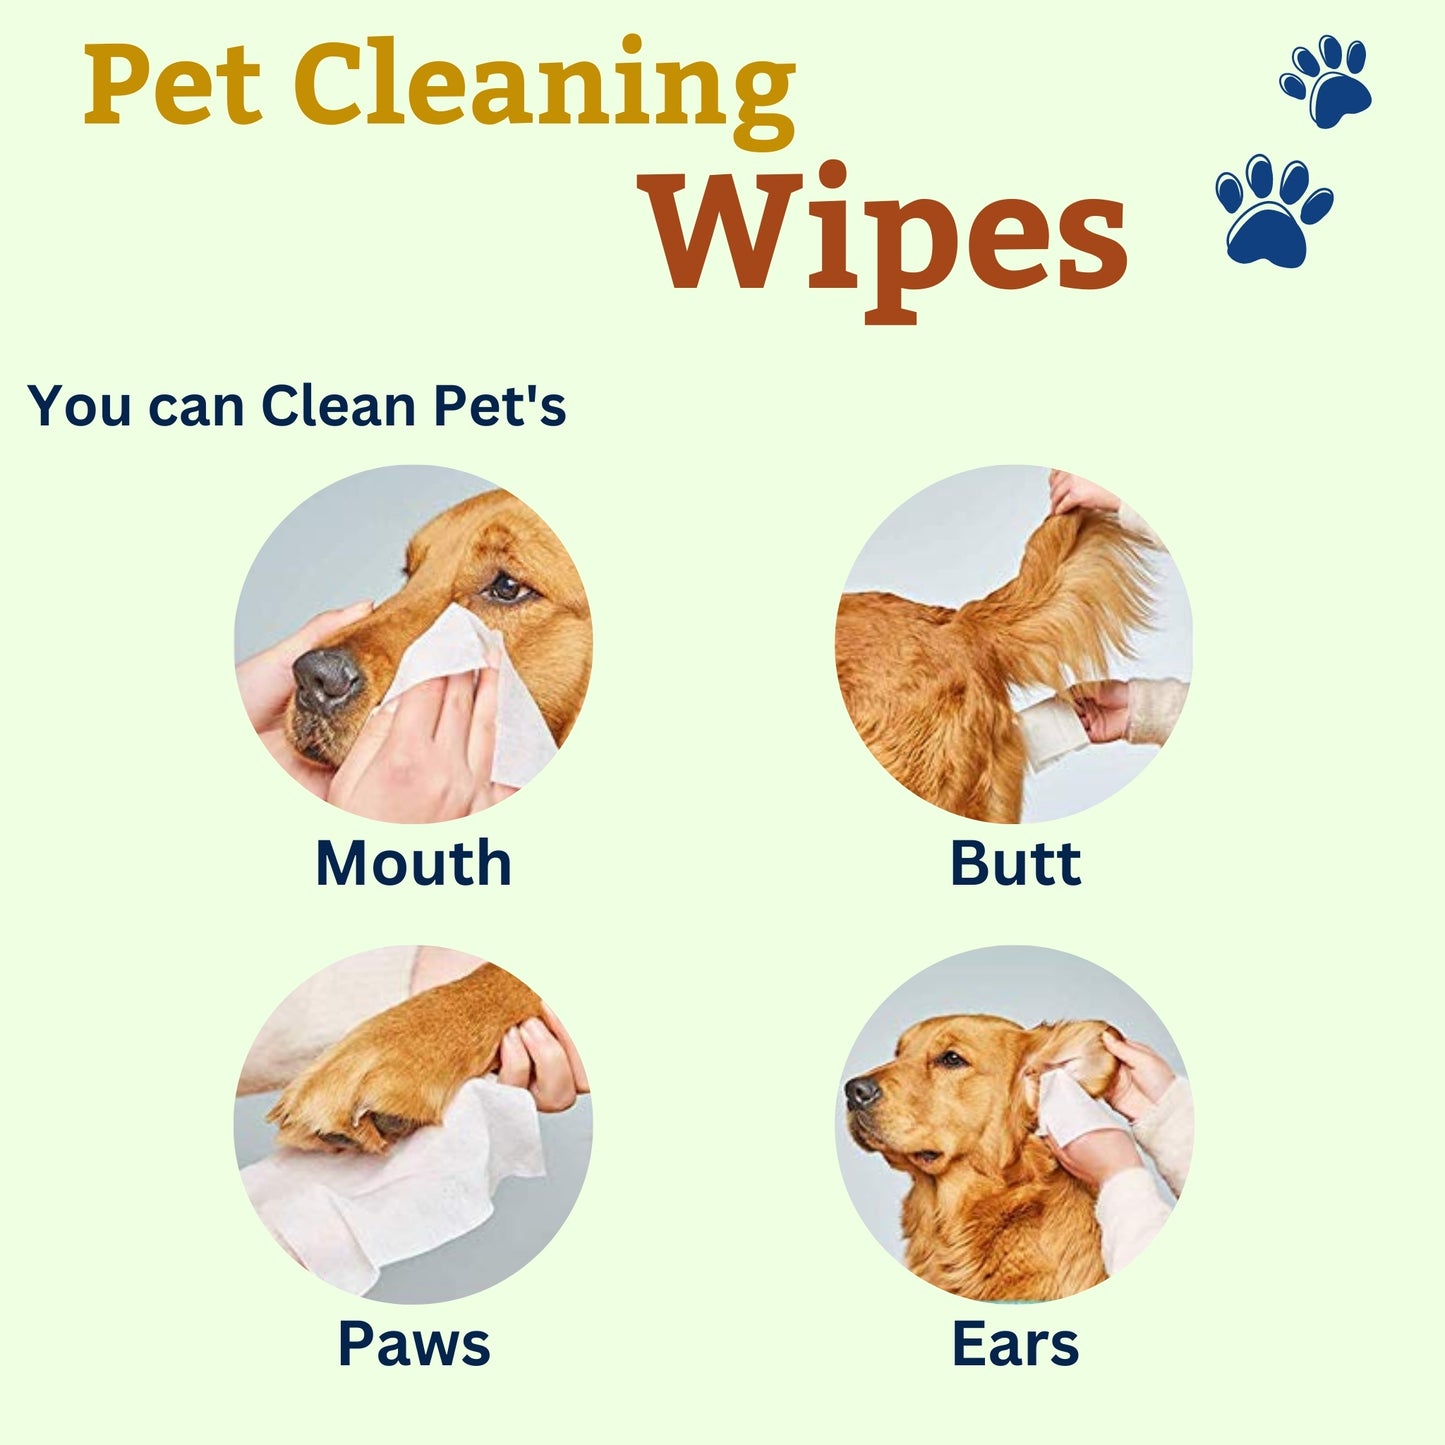 Wipes for Dogs